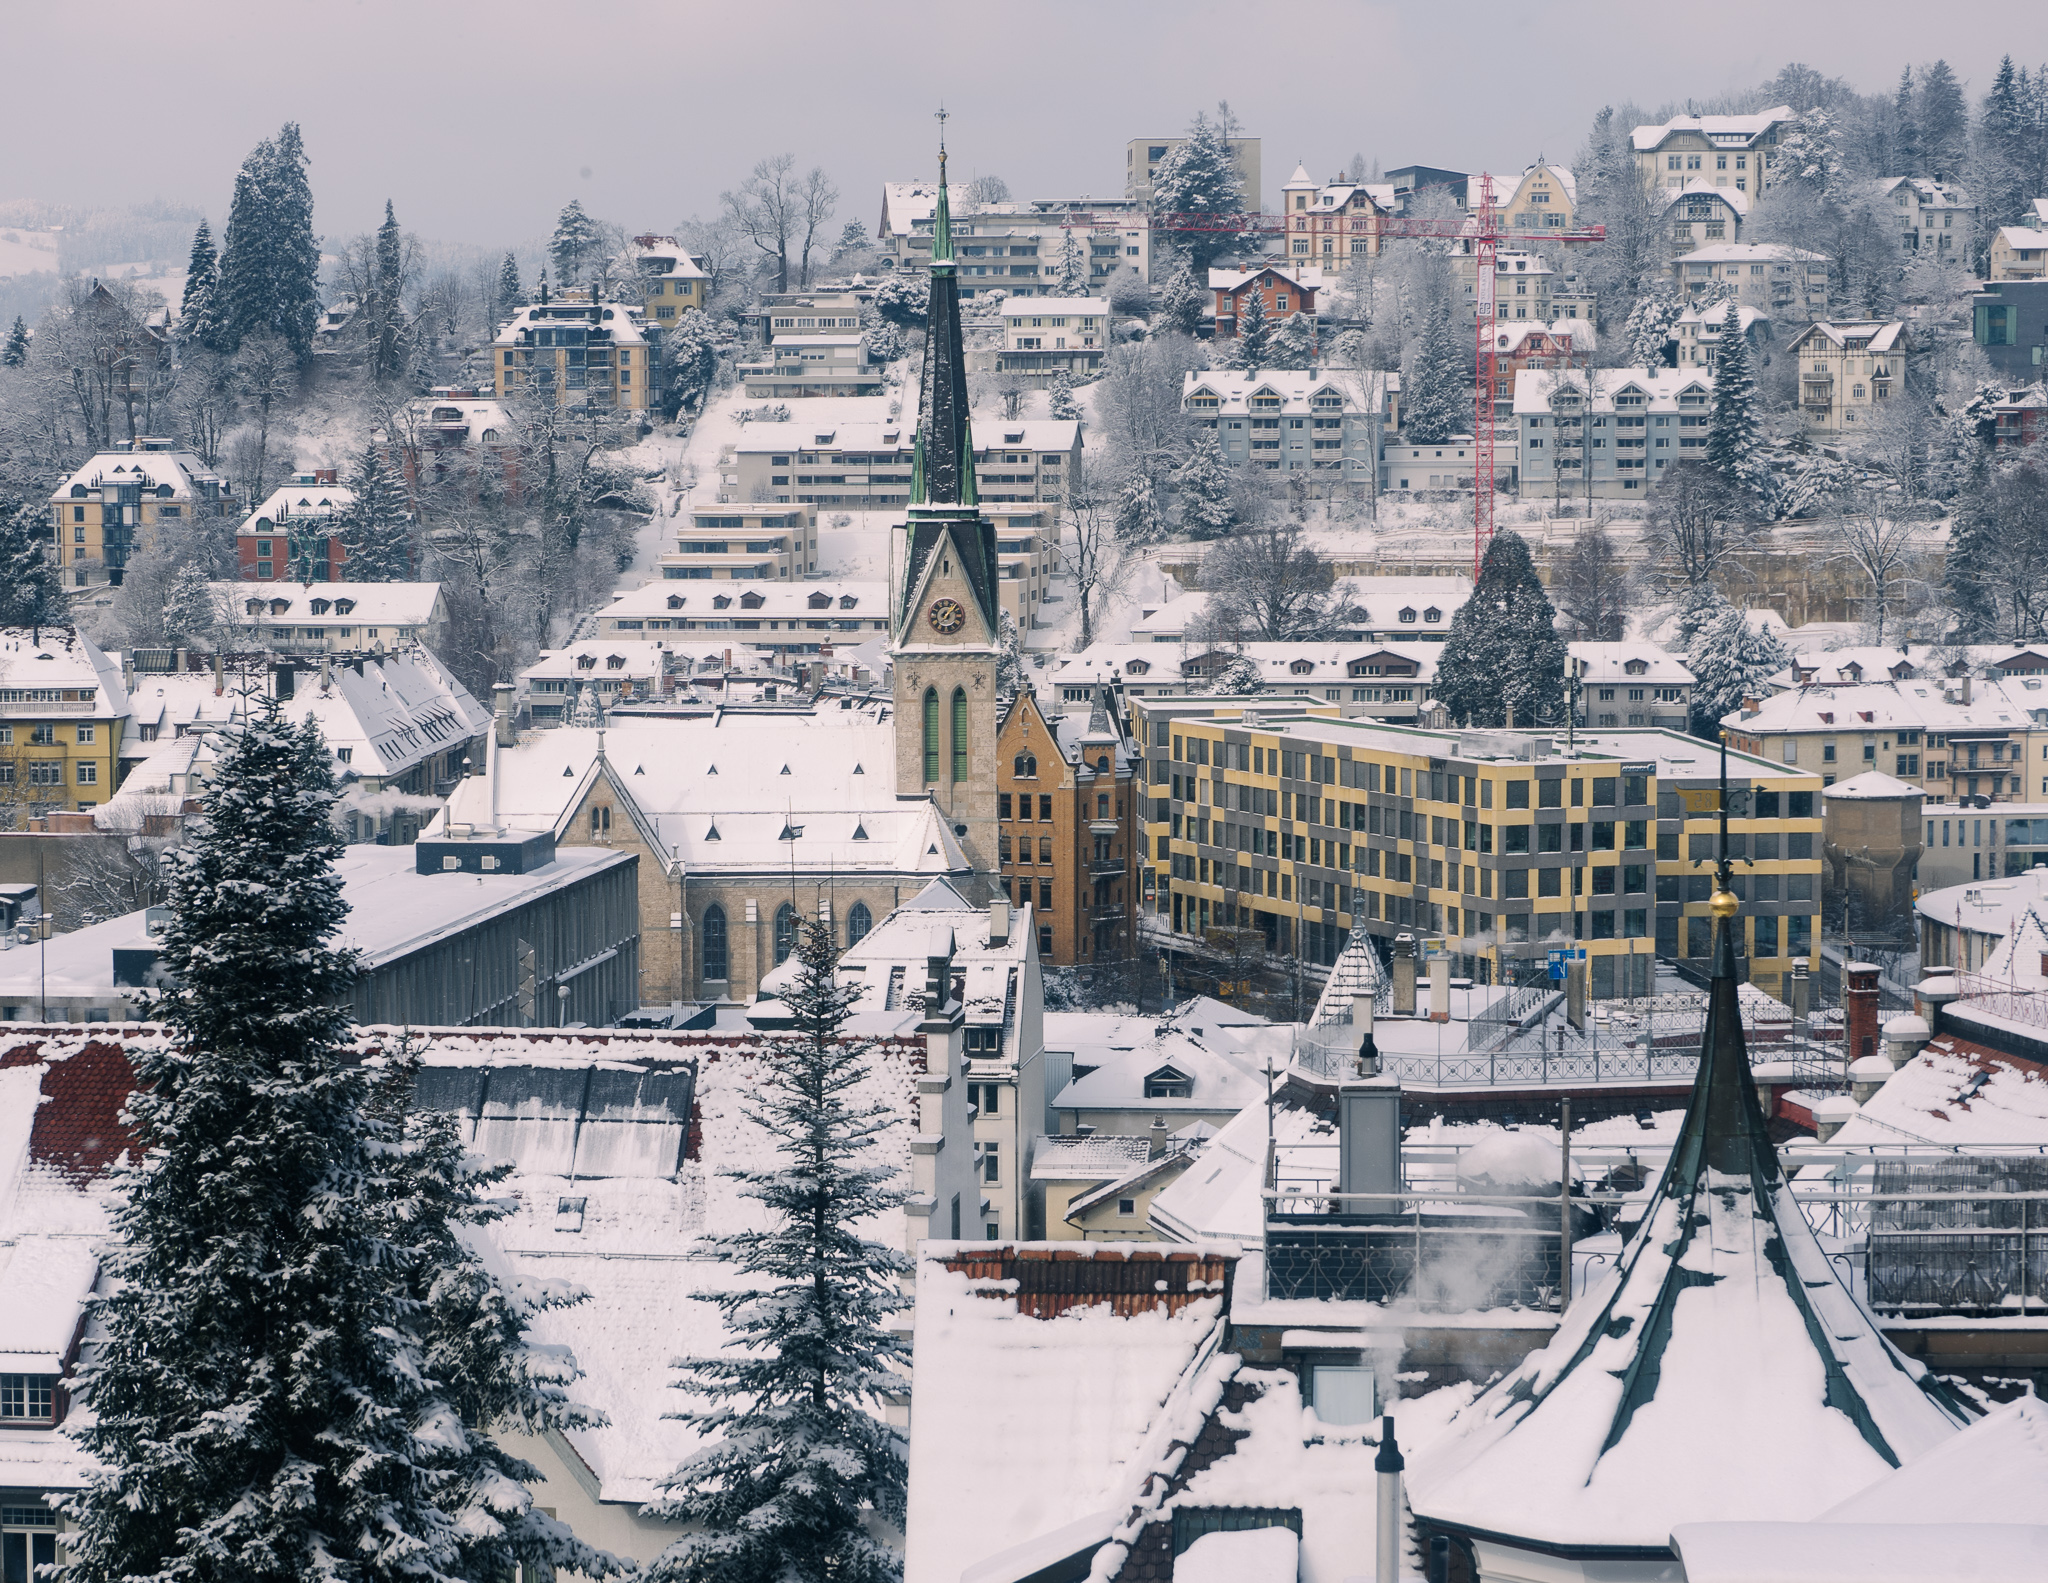 A view of st. gallen from above in winter, with snow on the church, buildings, trees and hills.